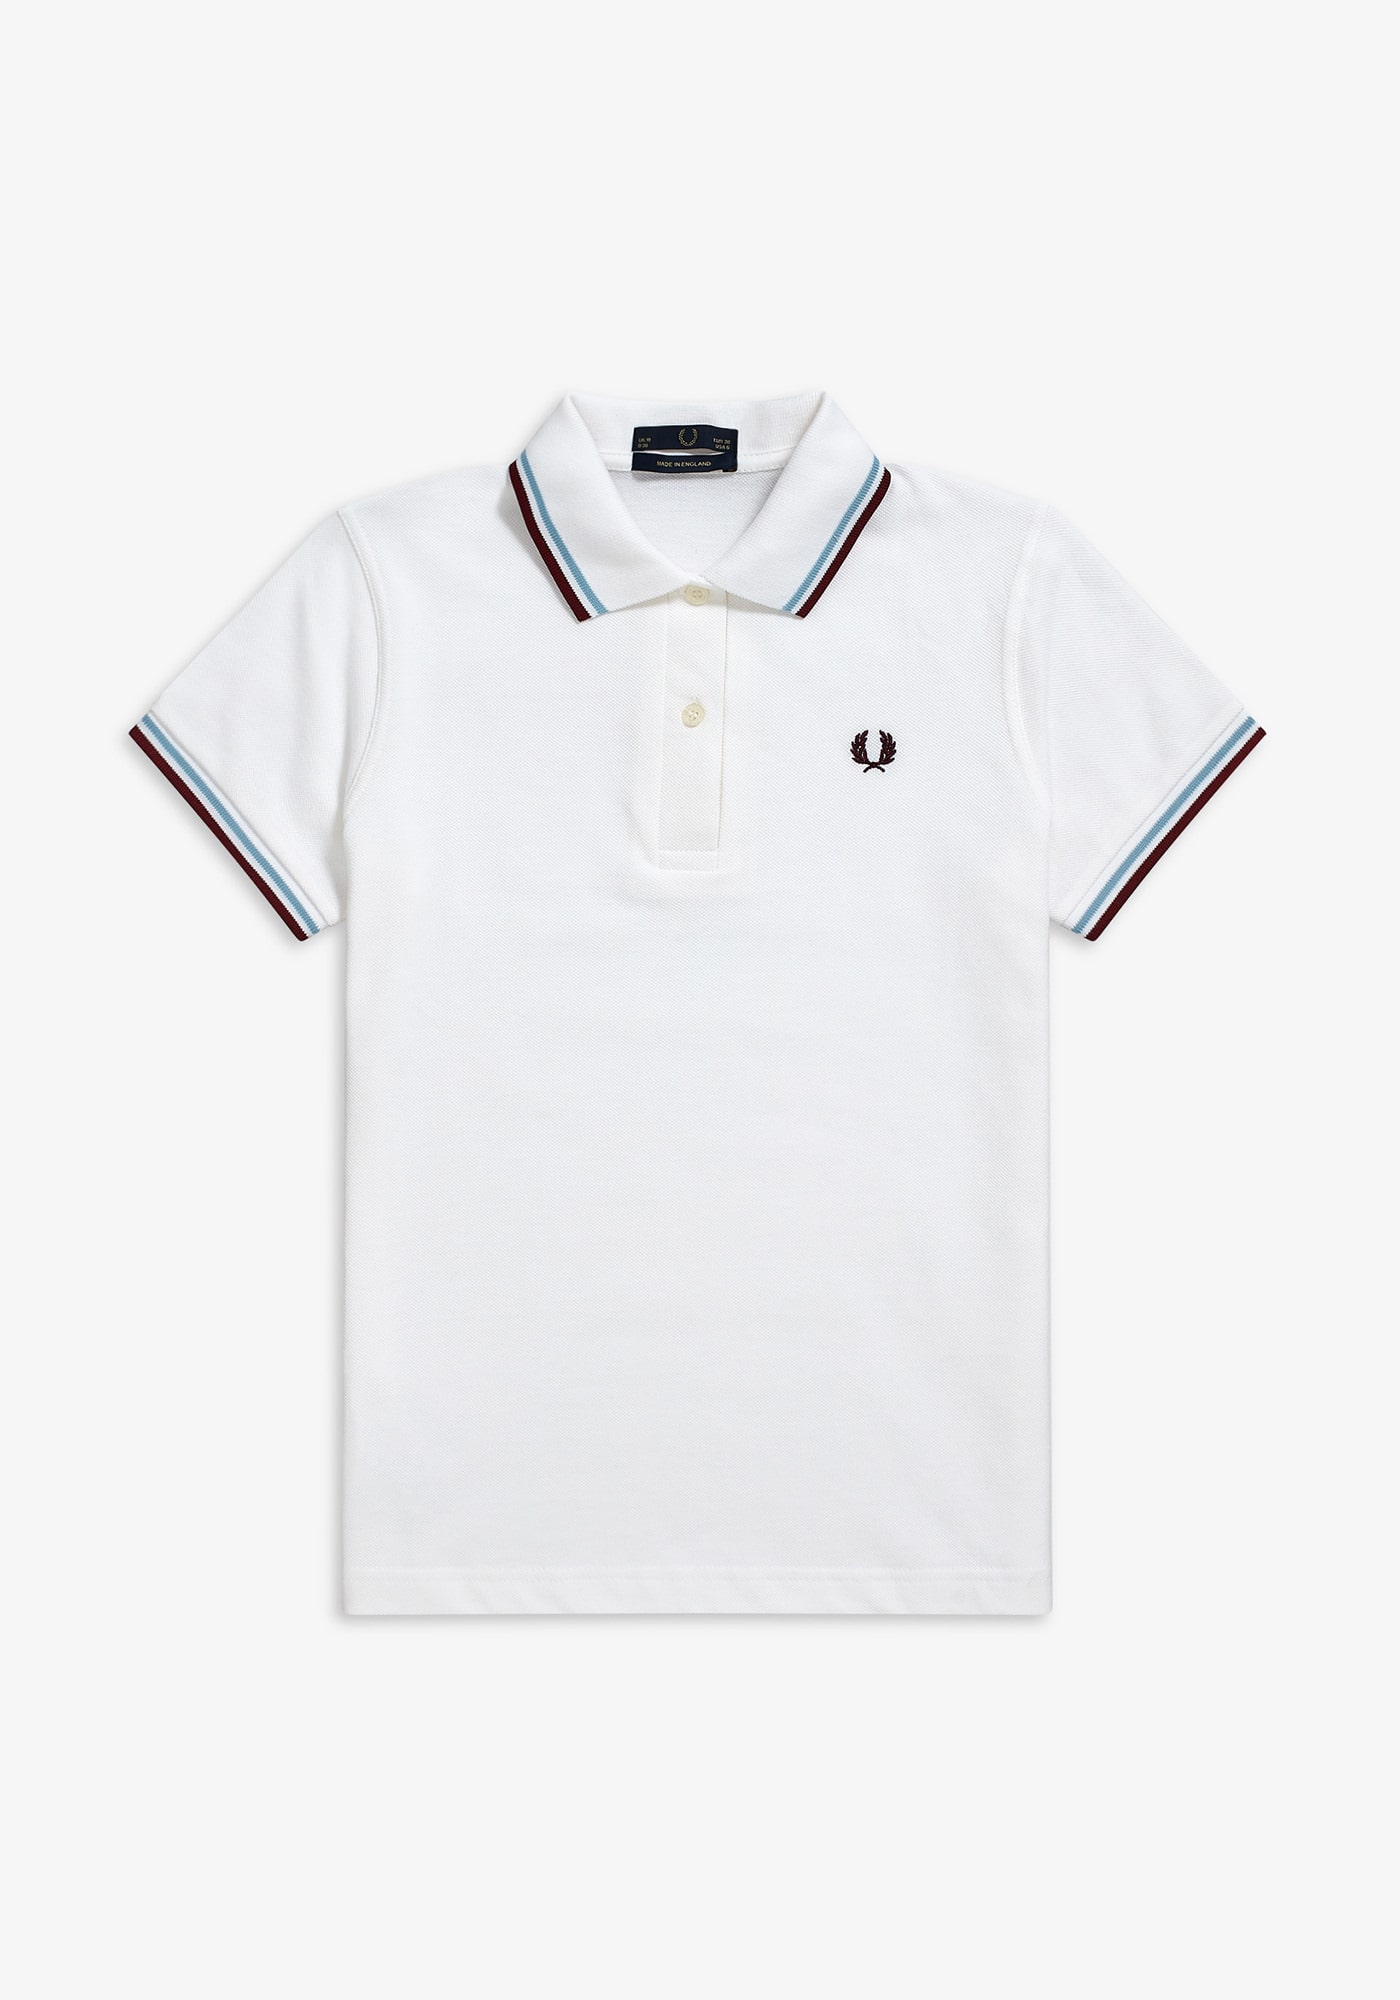 The Fred Perry Shirt - G12(8 157: BLACK / CHAMPAGNE)｜ FRED PERRY｜渋谷PARCO |  ONLINE PARCO（オンラインパルコ）